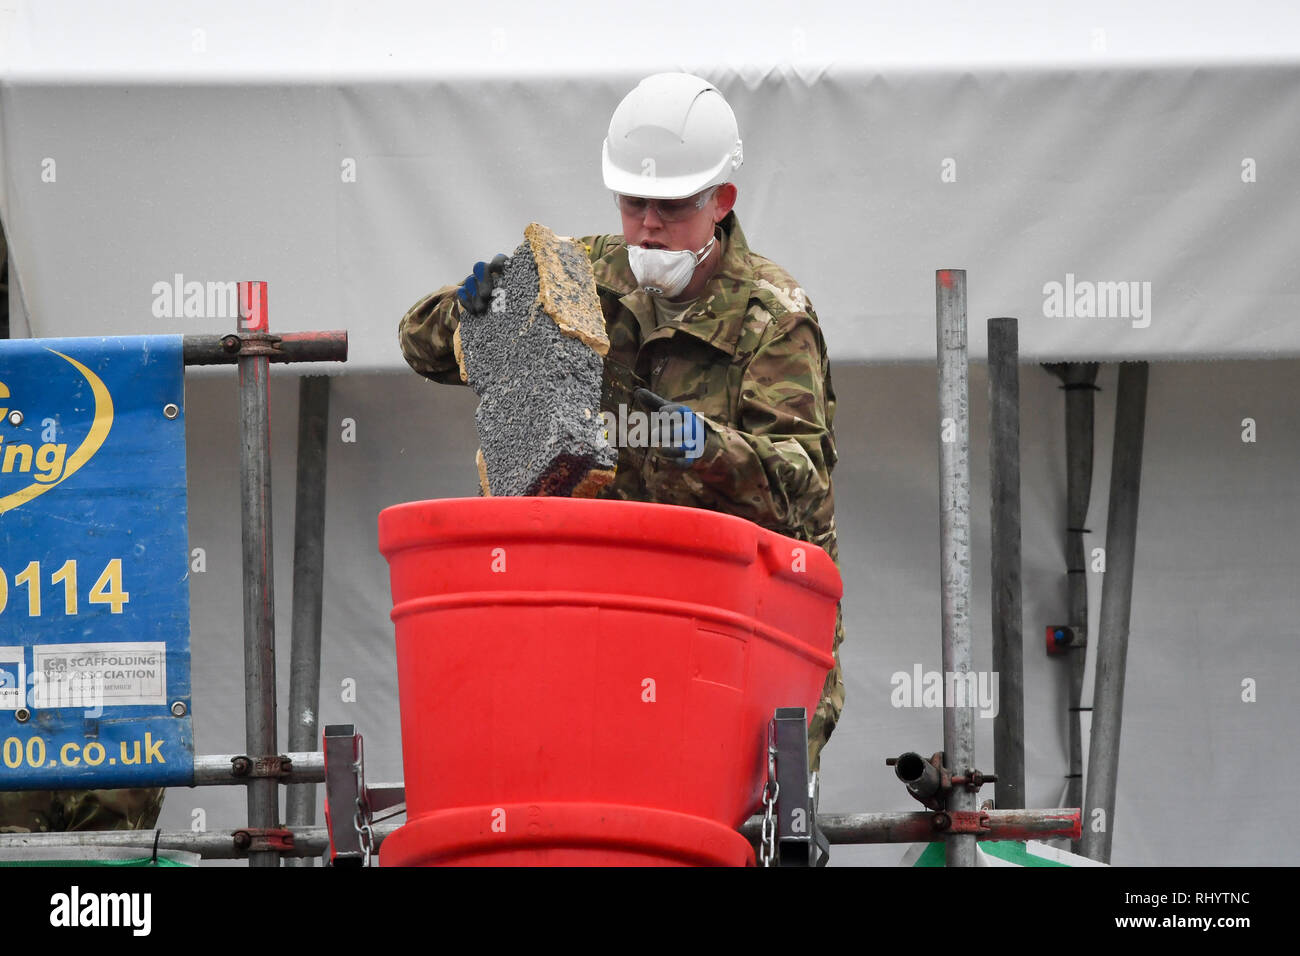 A man dressed in British Army fatigues throws a brick down a chute after it is removed from the Skripals' house in Salisbury, as the roof is being taken down after the novichok attack. Stock Photo